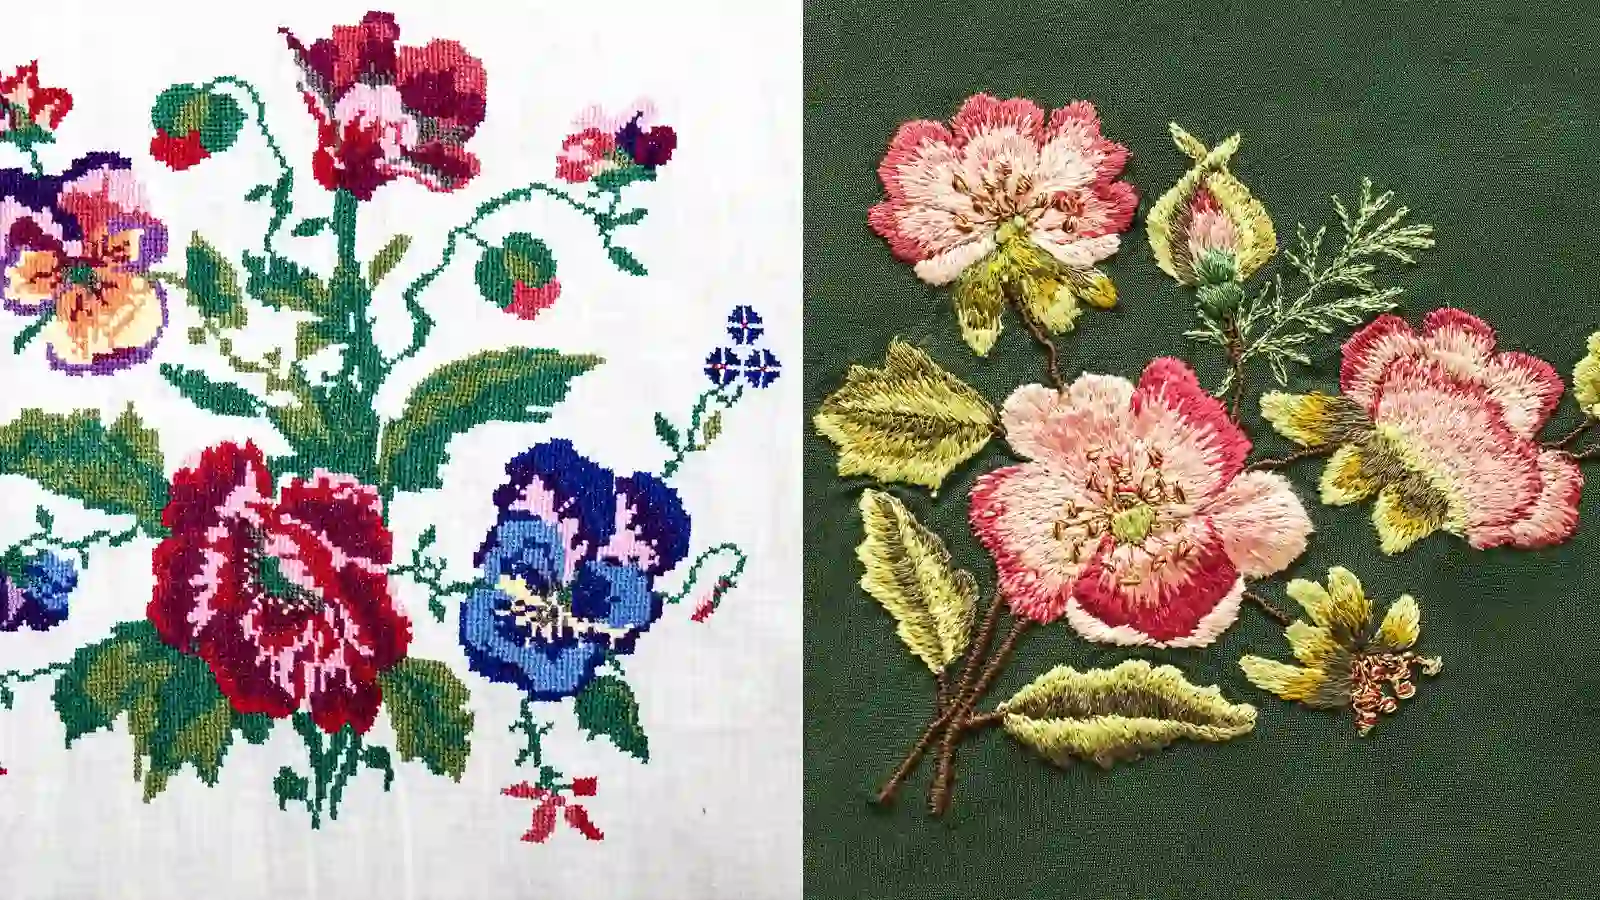 Needlepoint vs Embroidery: What is the Difference Between Needlepoint and Embroidery?